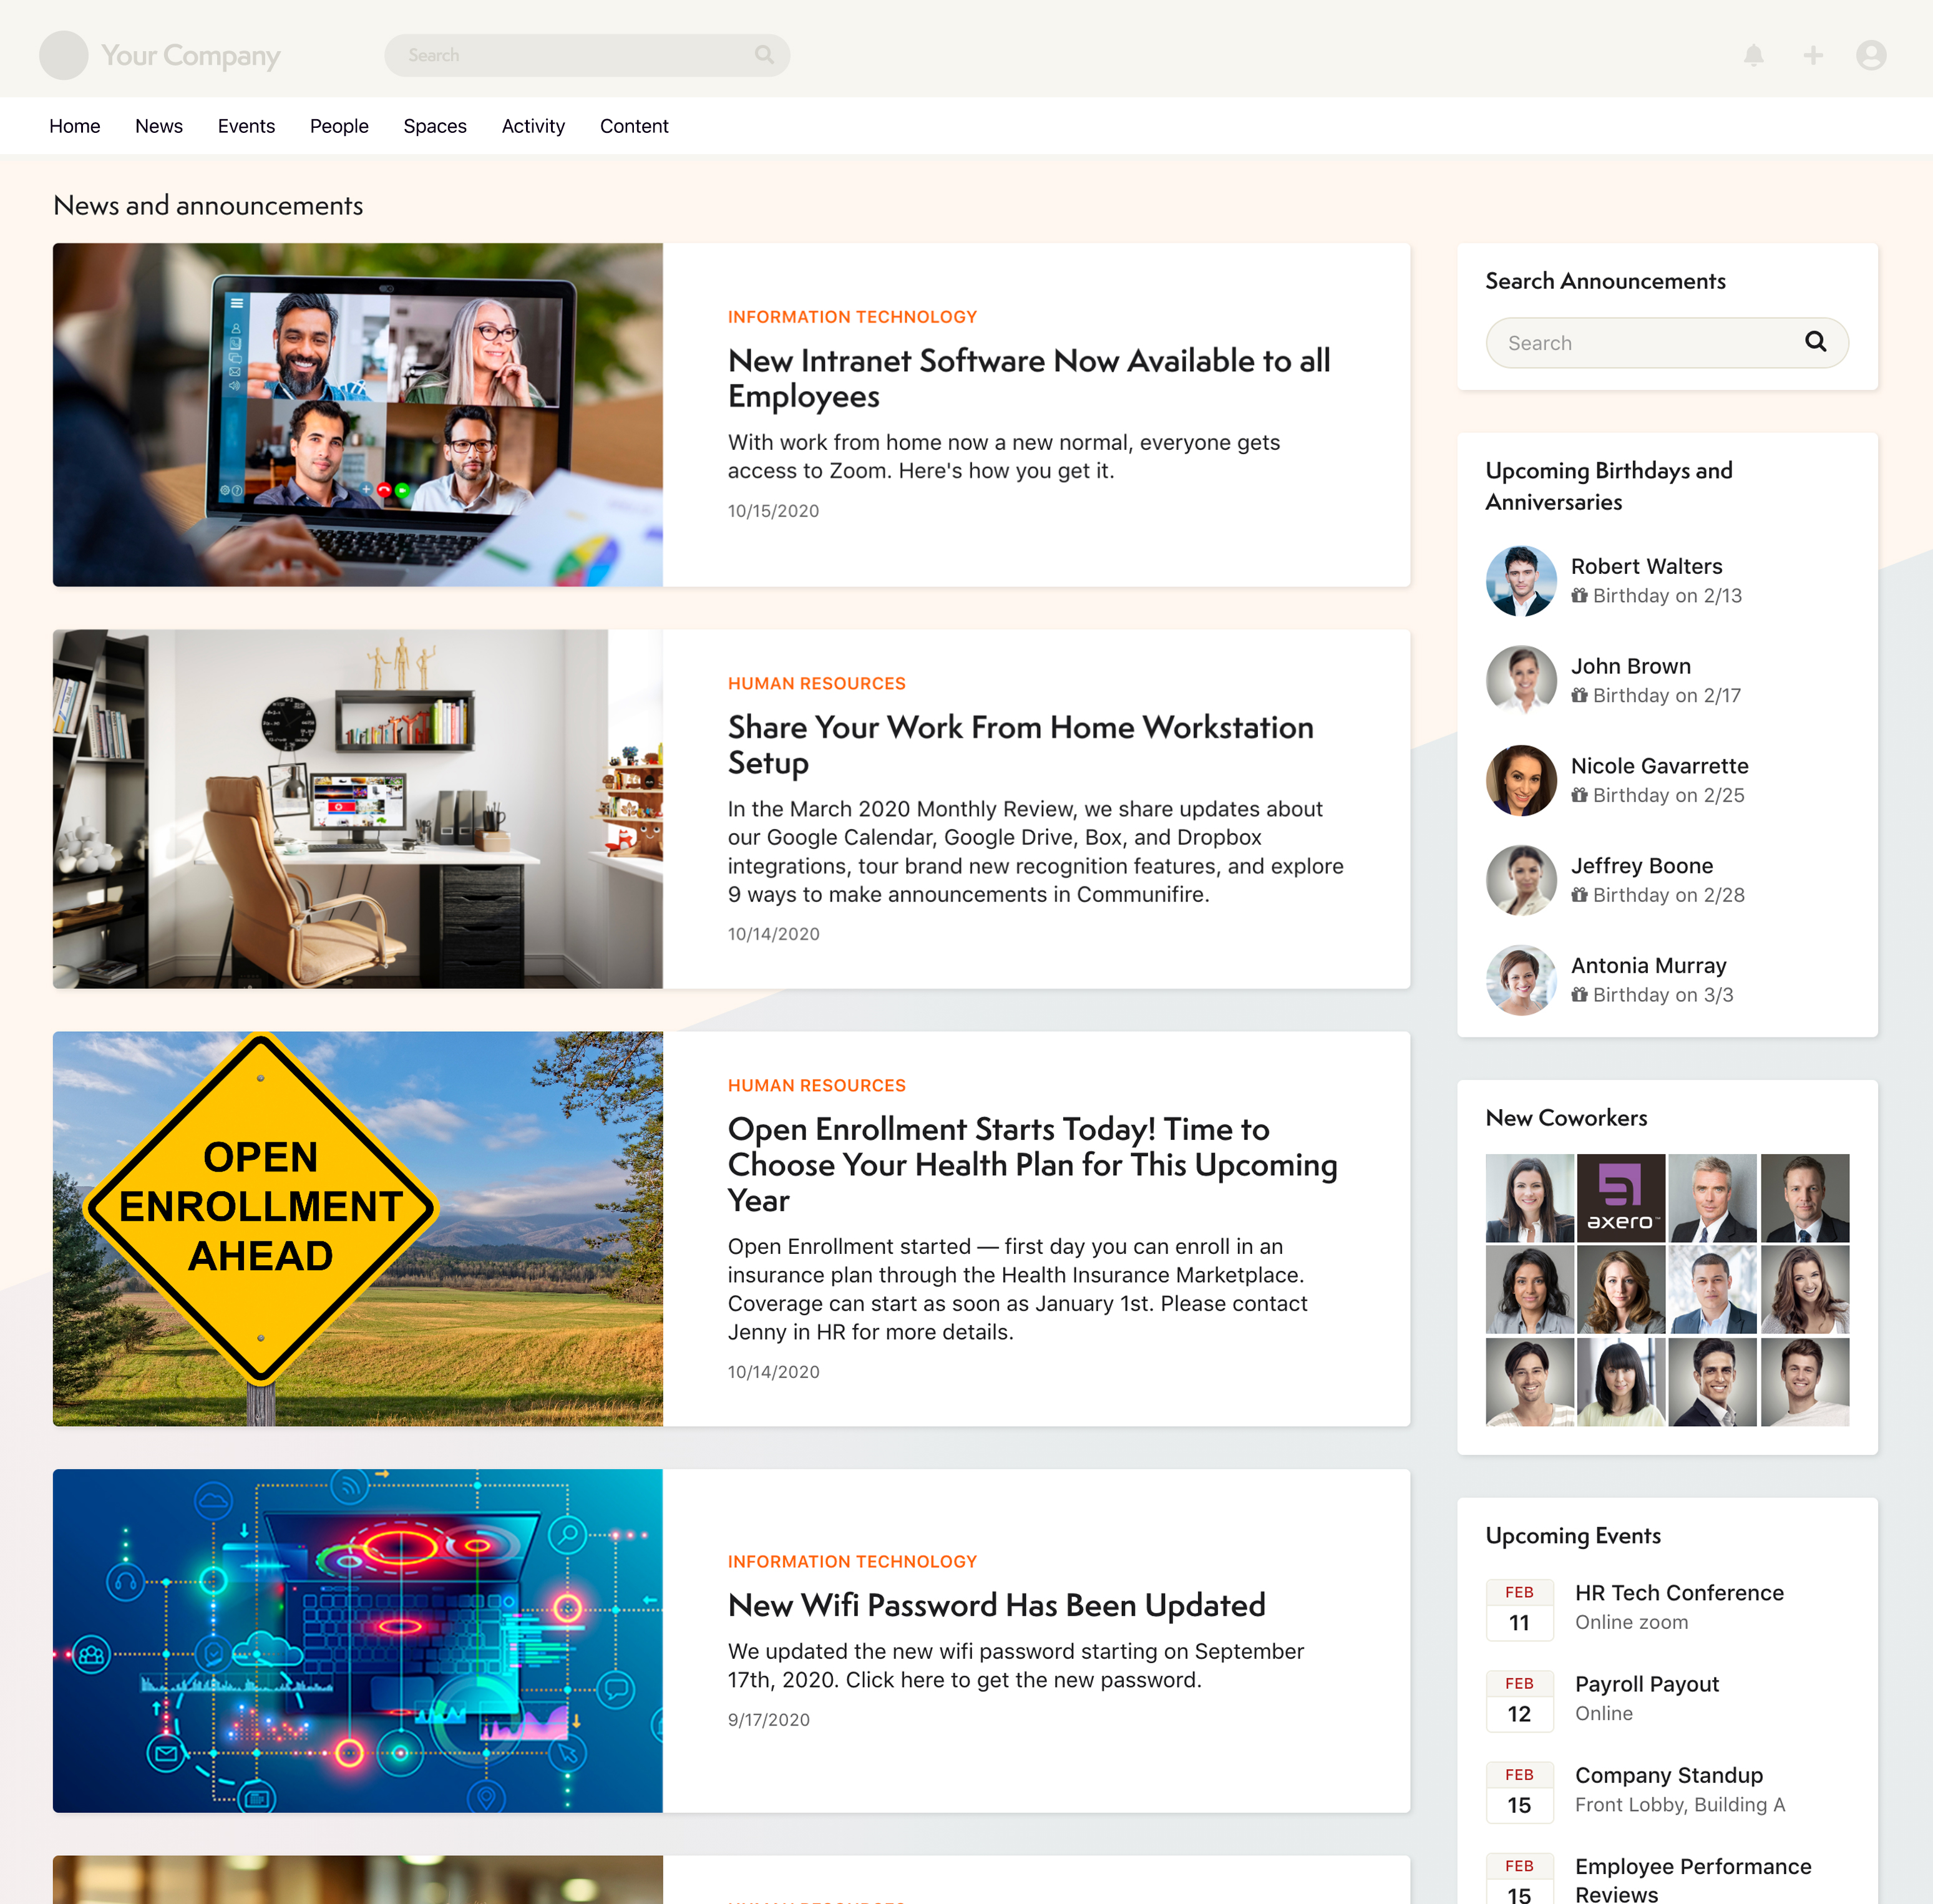 enterprise social networking - intranet news and announcements